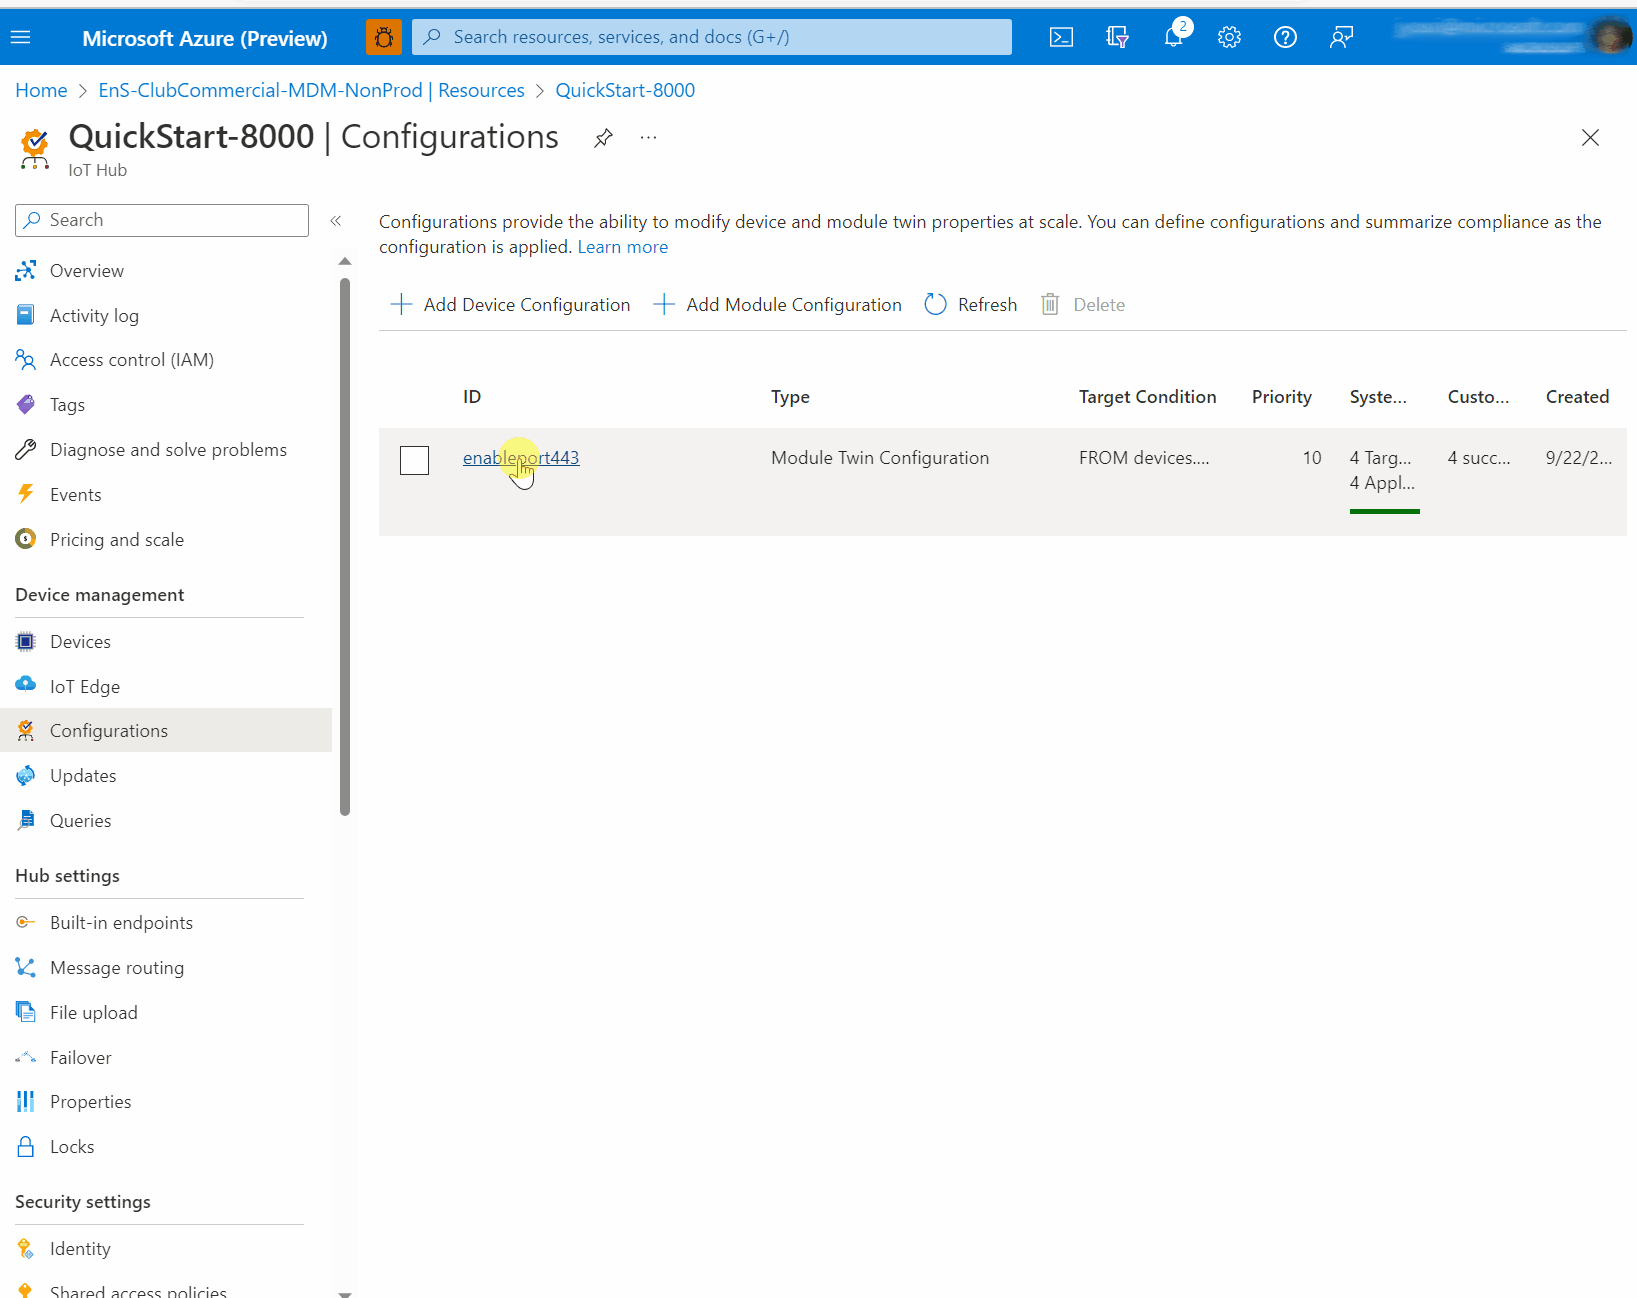 Screen capture showing how to create verify metrics after a configuration for setting firewall rules for a fleet of devices is applied from Azure Portal